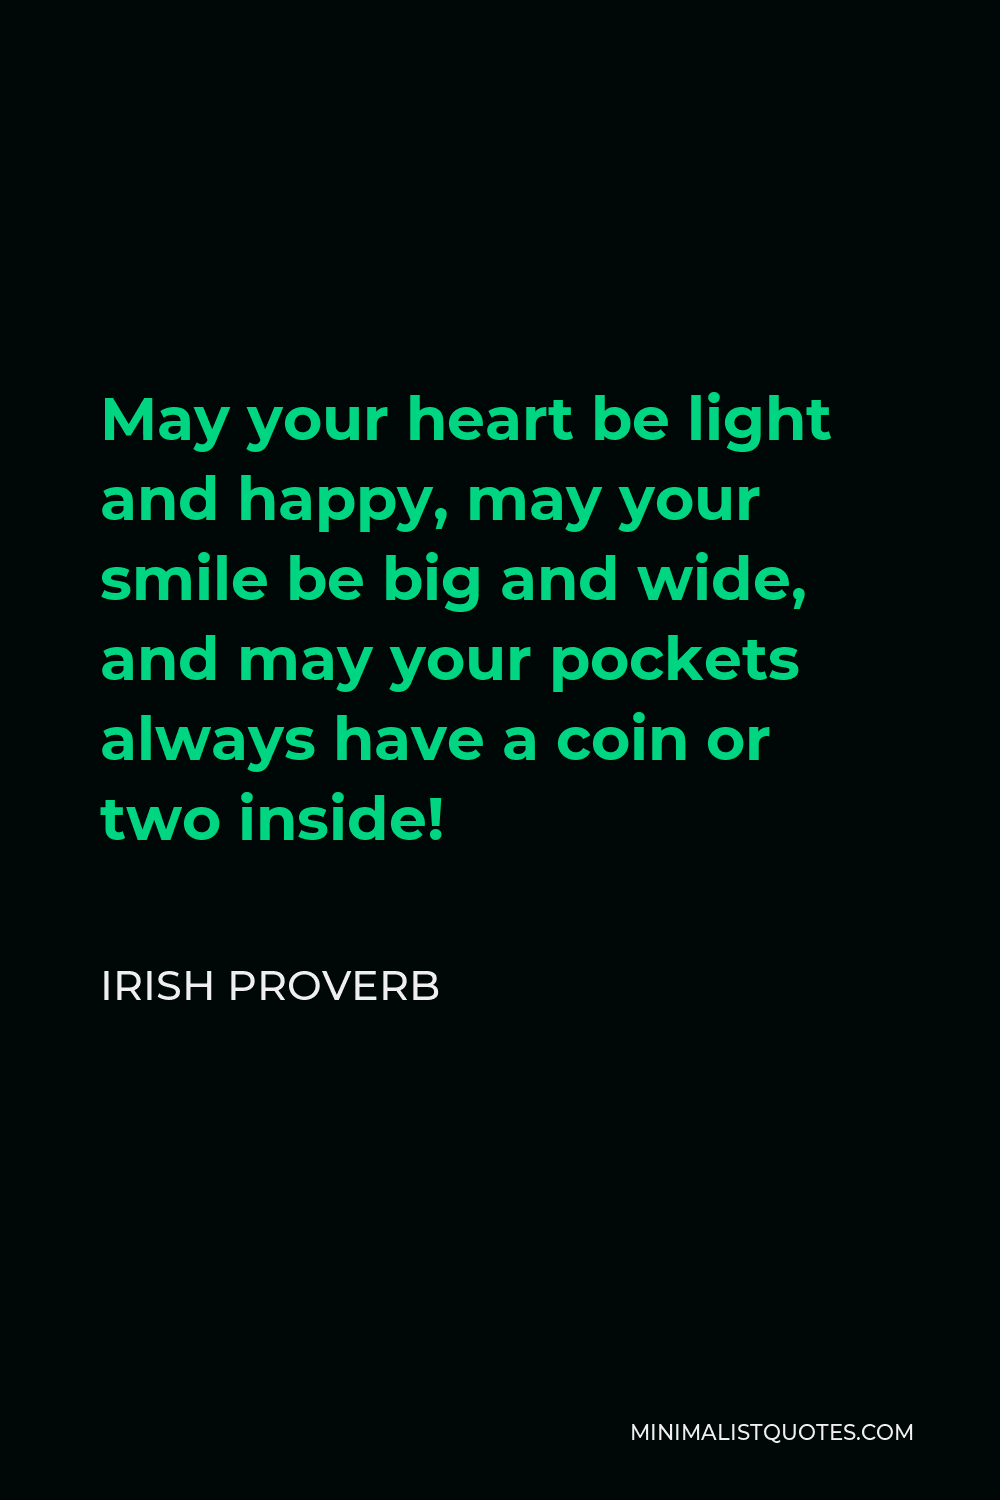 Irish Proverb Quote - May your heart be light and happy, may your smile be big and wide, and may your pockets always have a coin or two inside!